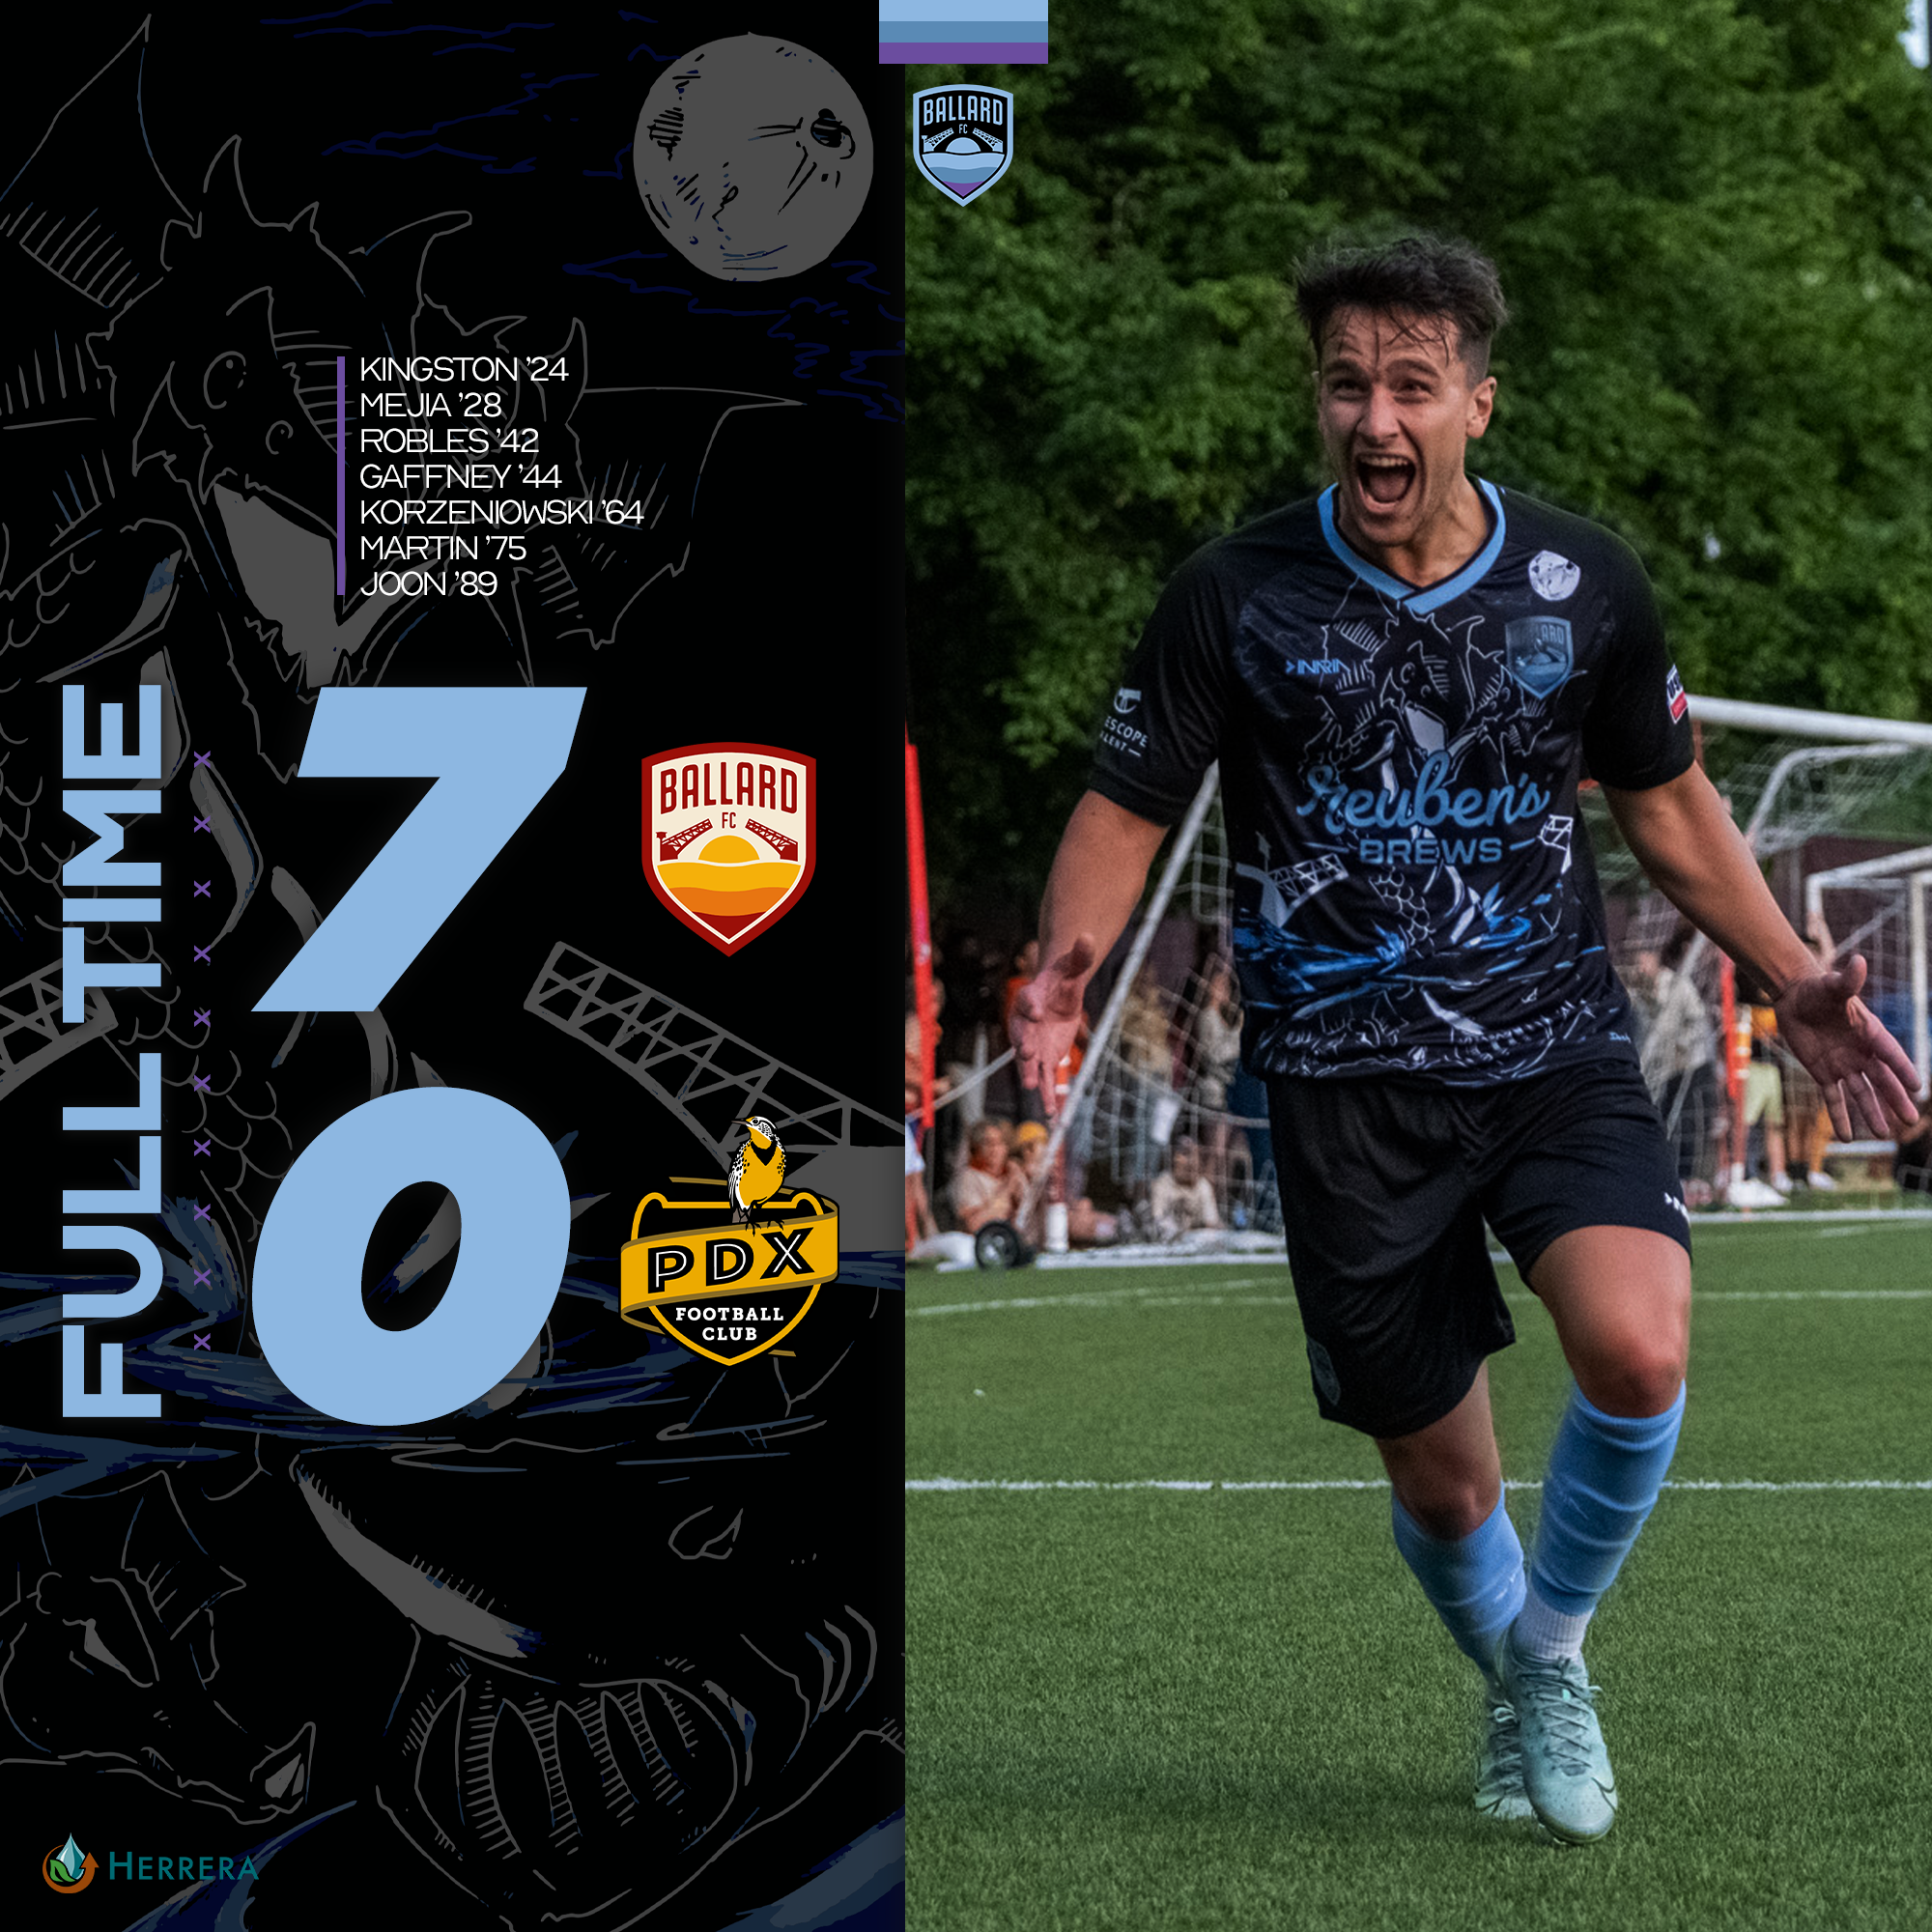 Ballard FC Rout PDX 7-0 to Stay Perfect on Season featured image